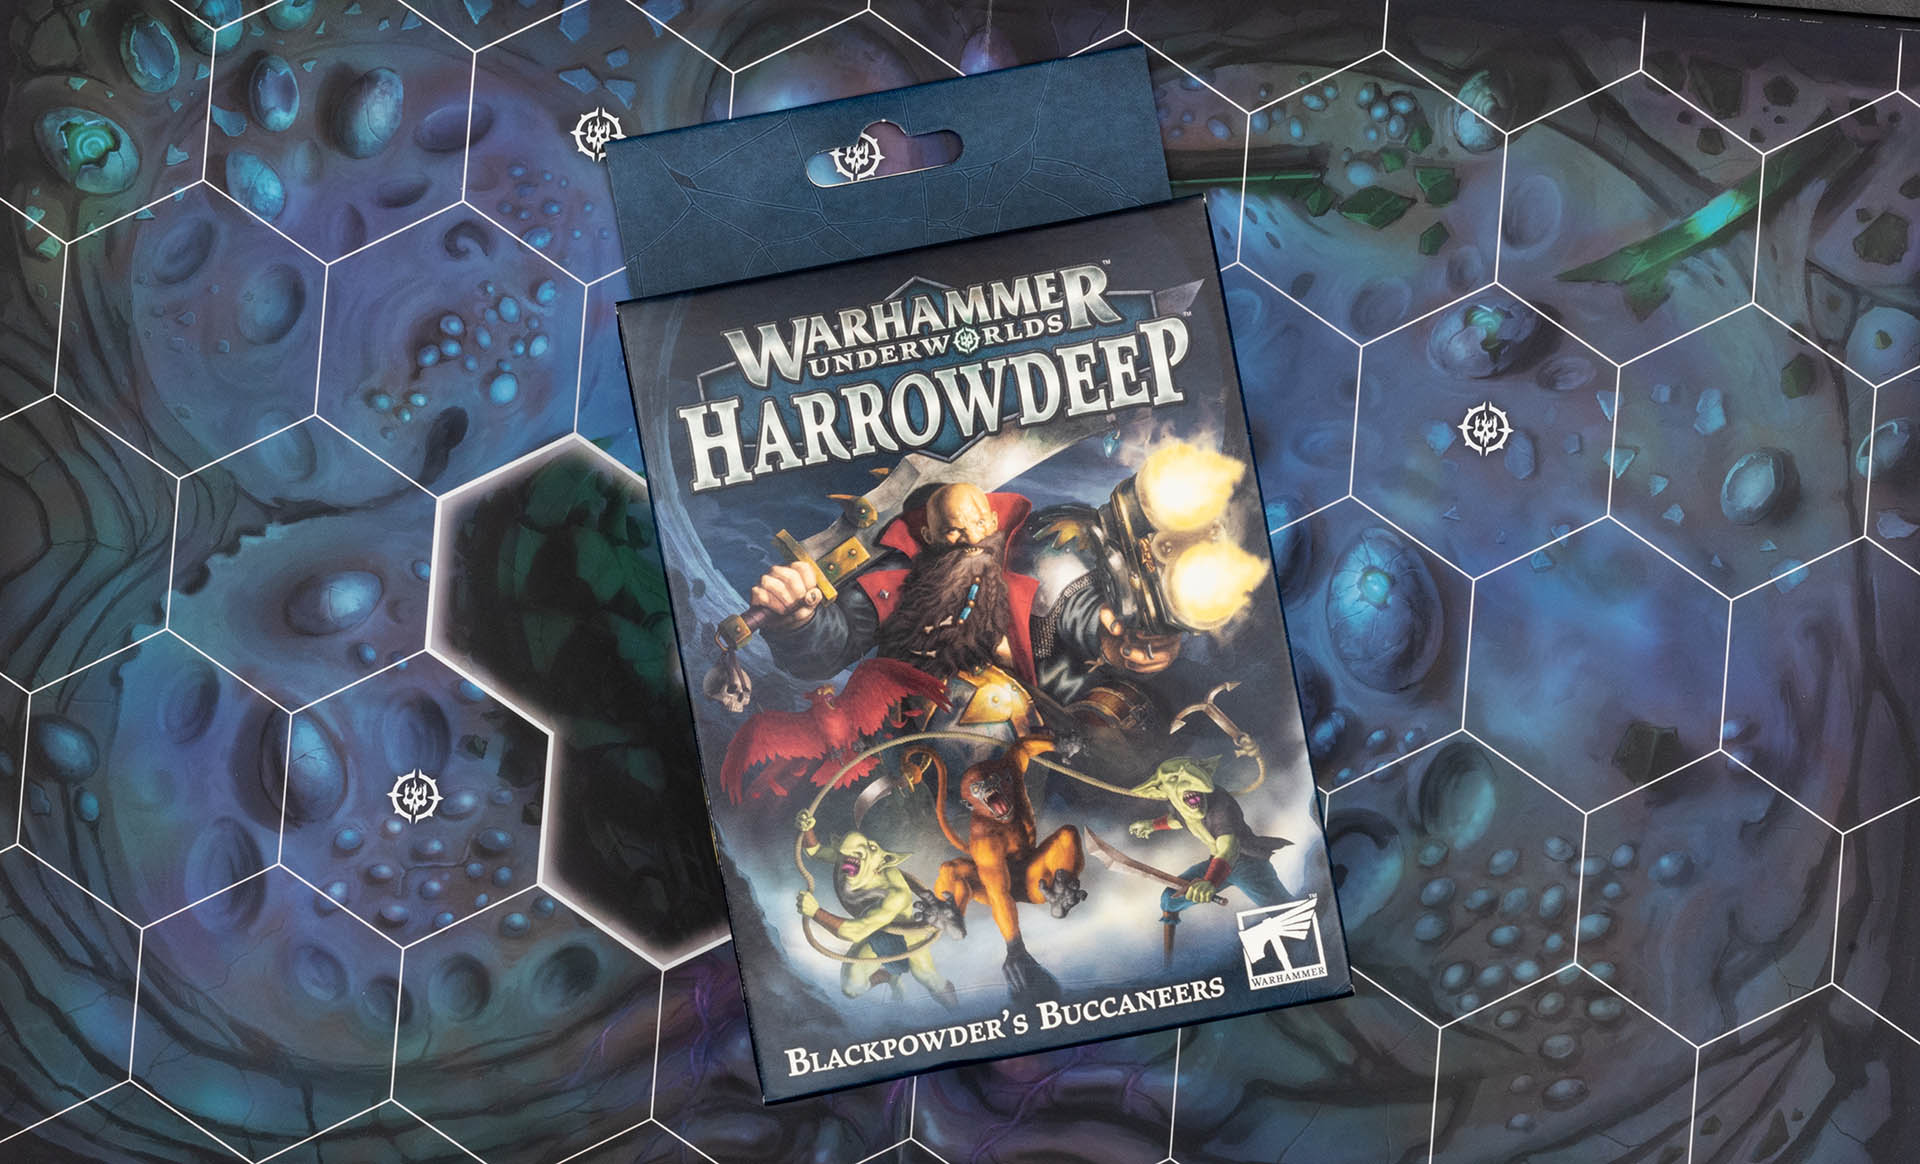 Blackpowder's Buccaneers unboxing and review